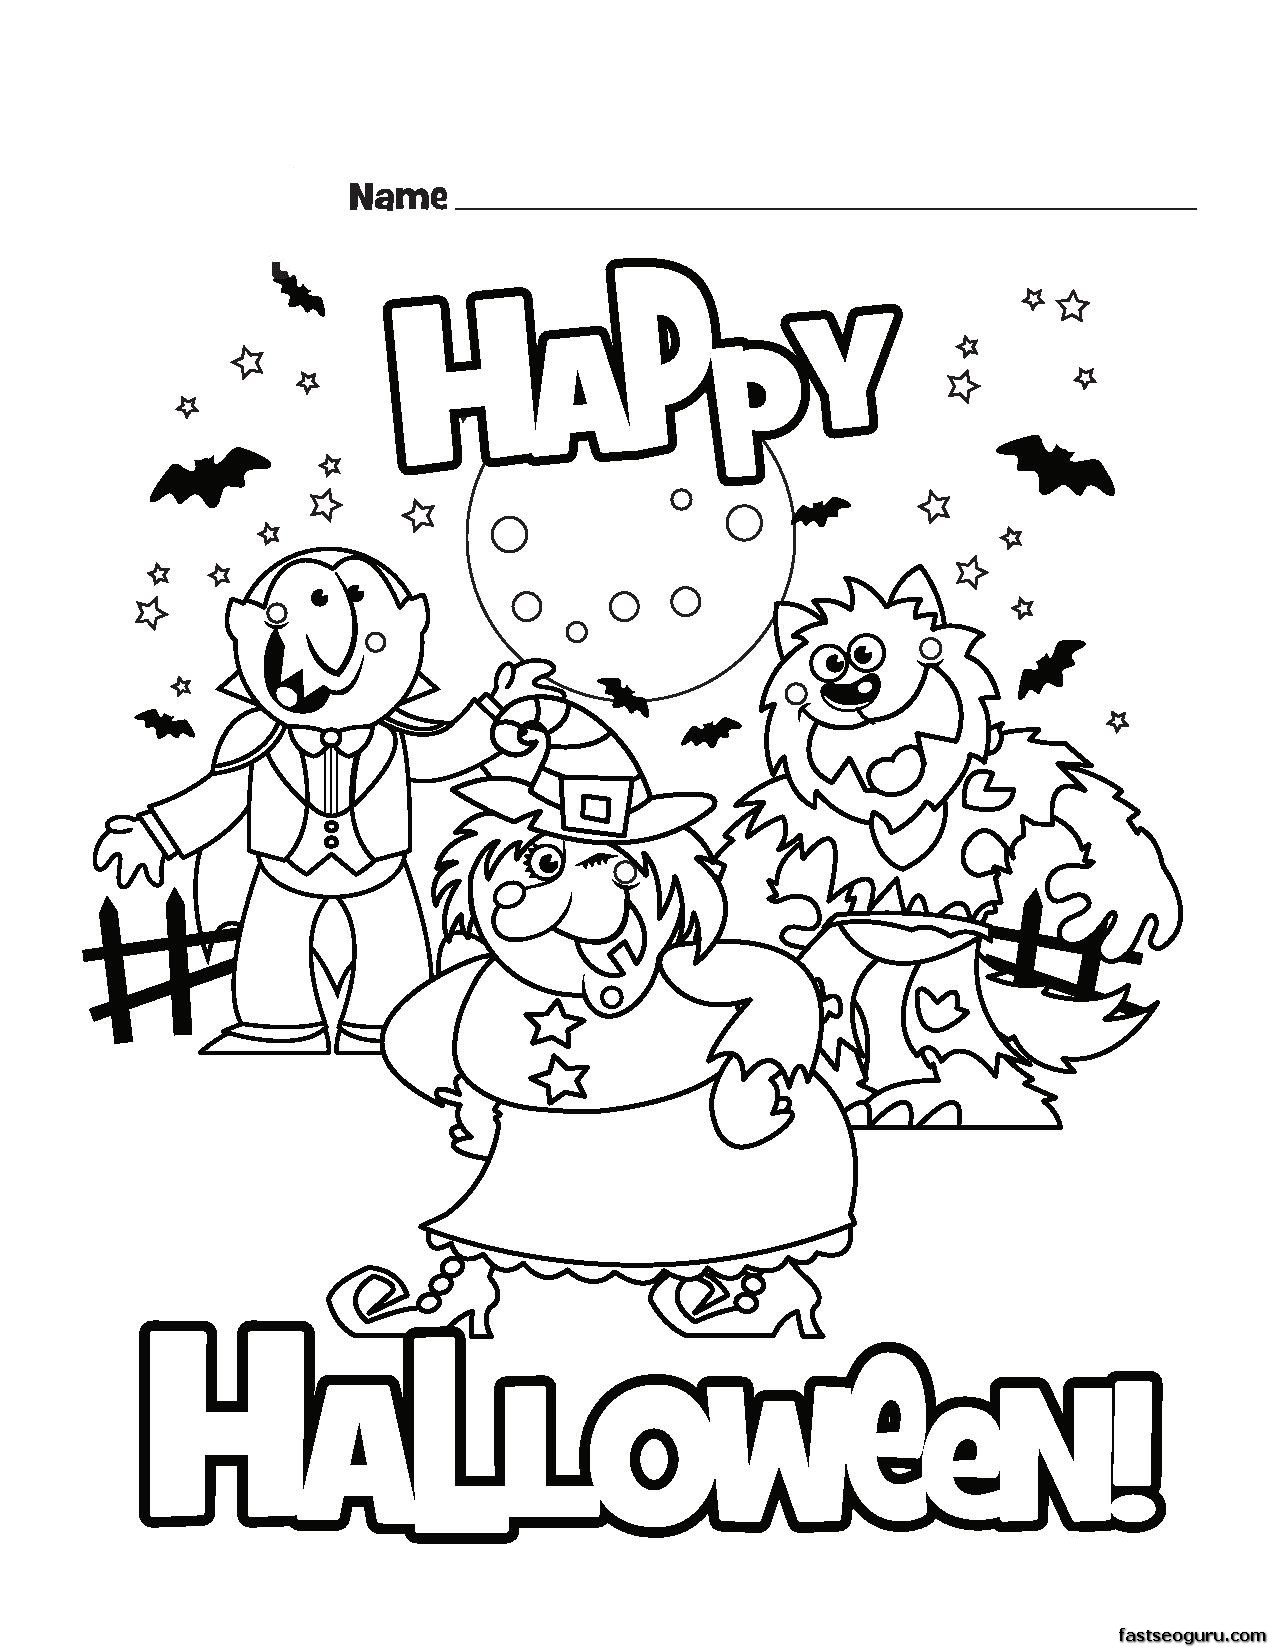 Halloween Colouring In Pages | lemmaye